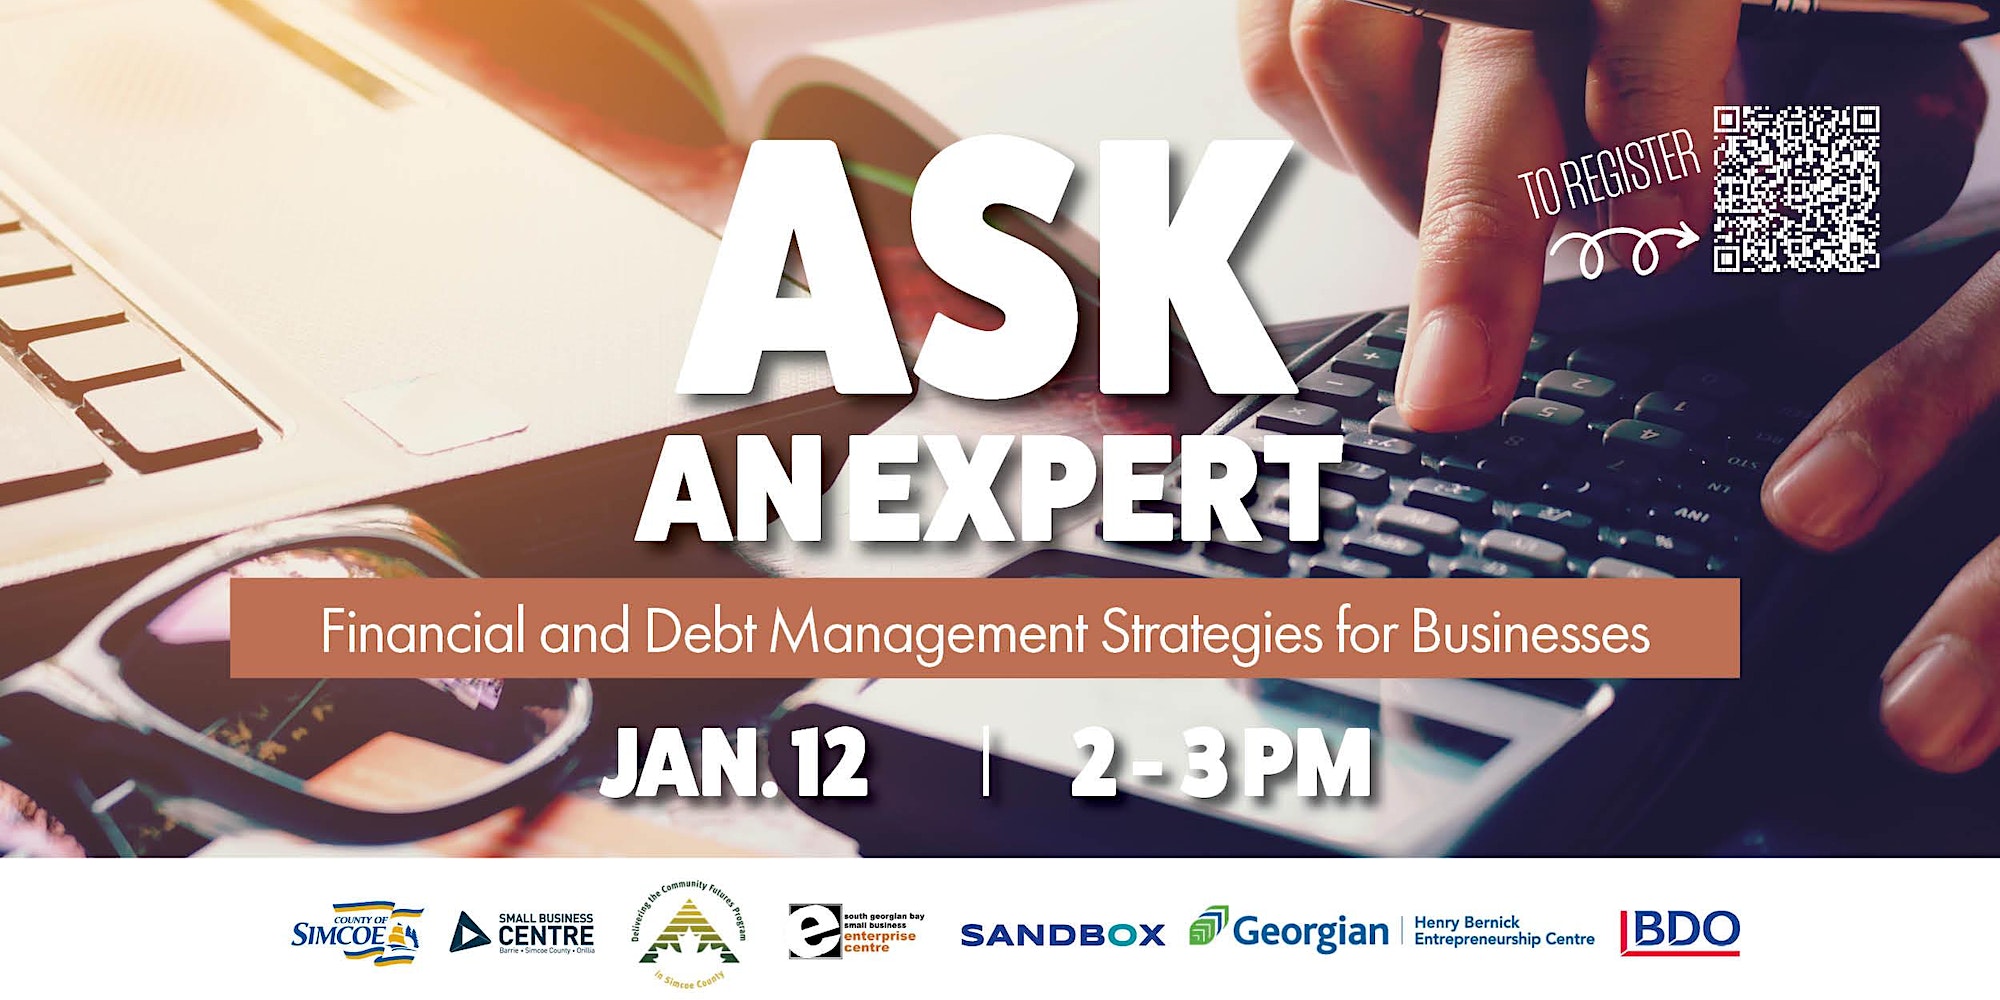 Financial & debt management strategies for businesses. Jan. 12th 2-3pm. Scan to register.